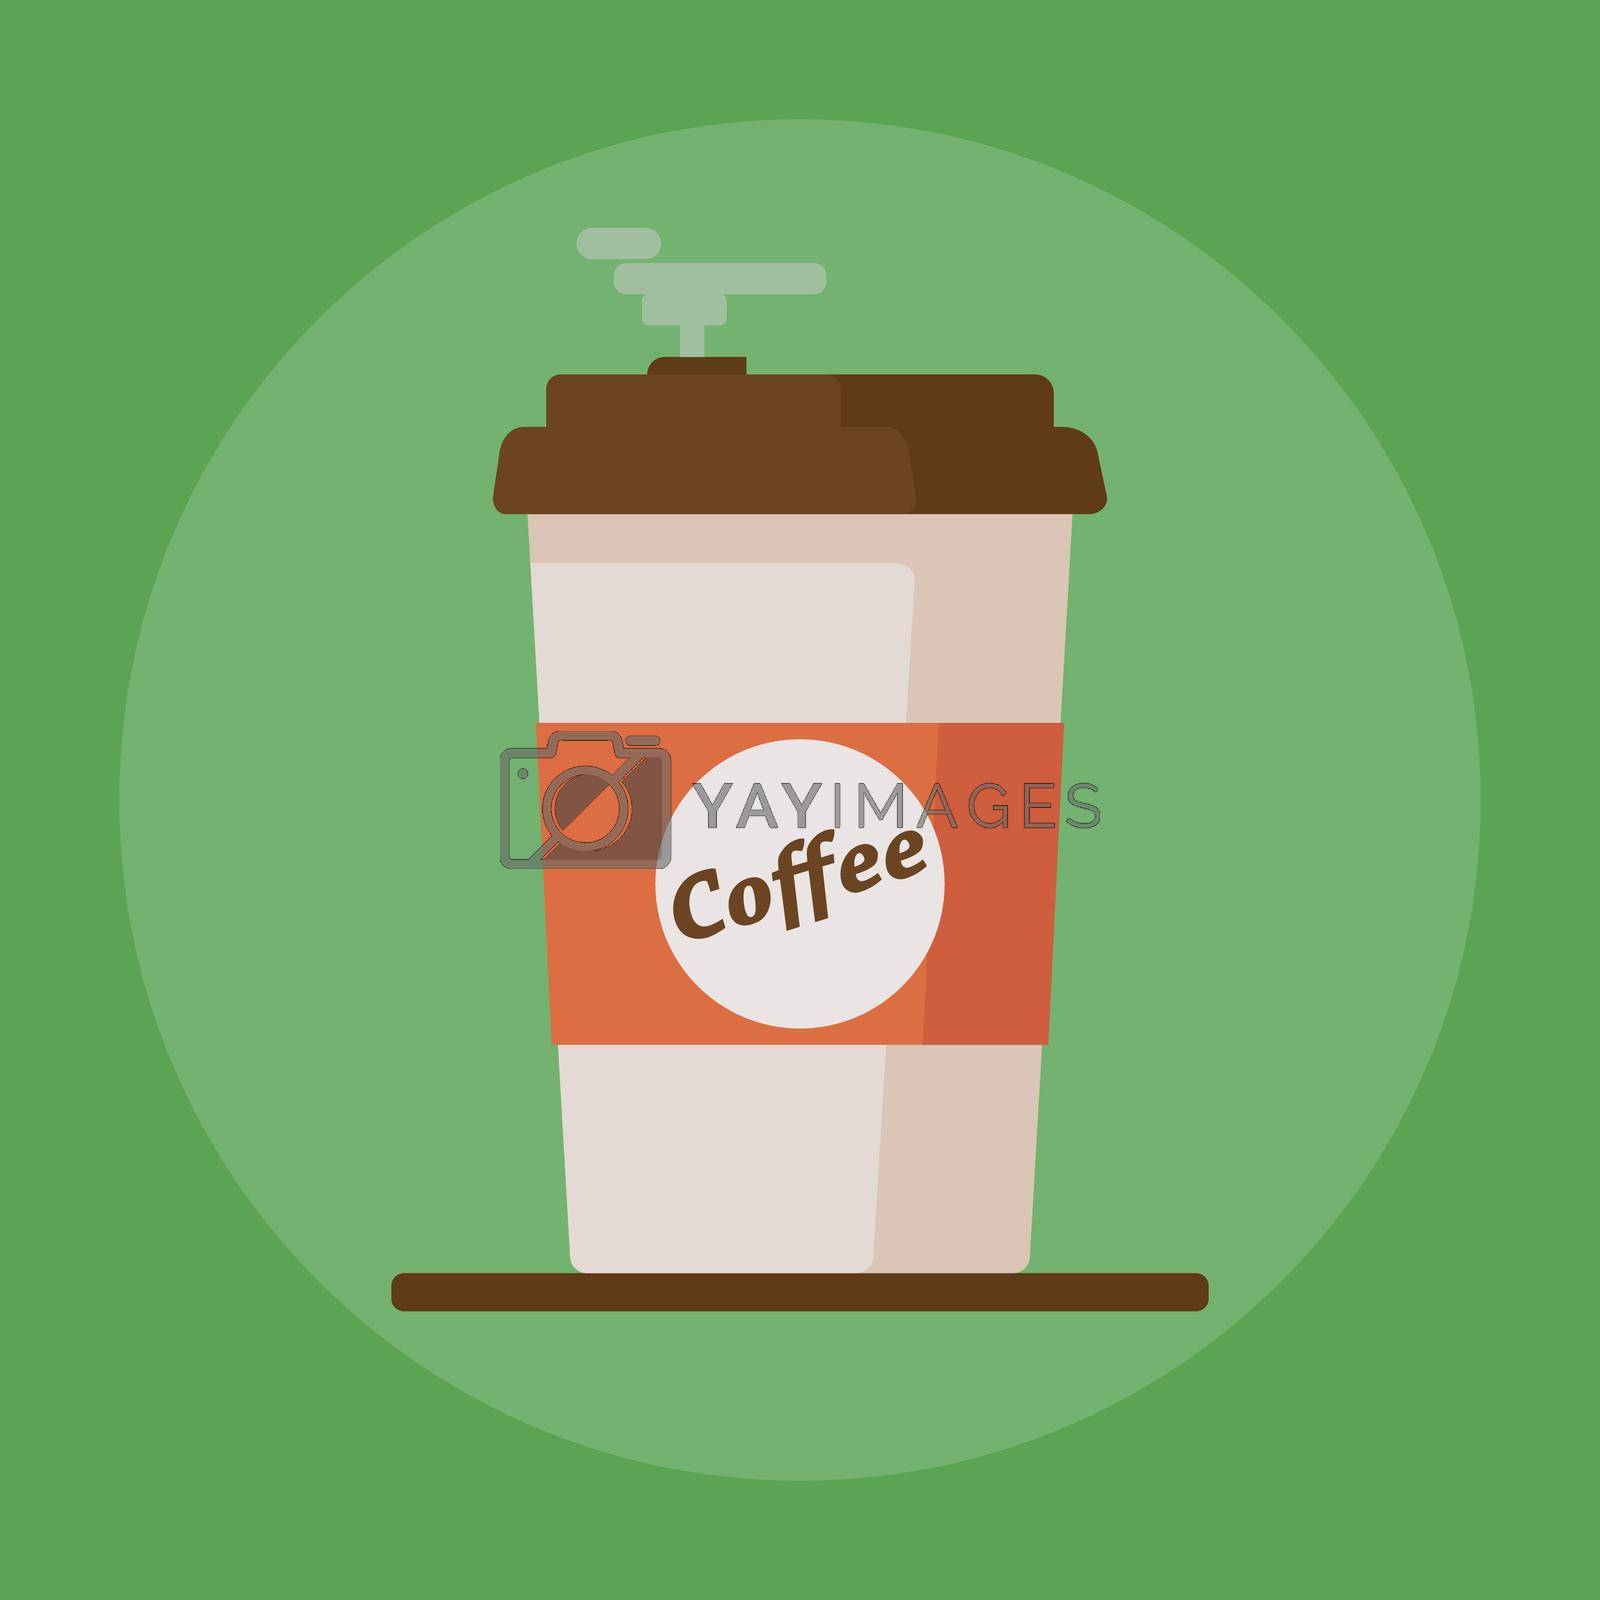 Royalty free image of Coffee cup icon with text coffee on green background. Flat vector illustration by LysenkoA